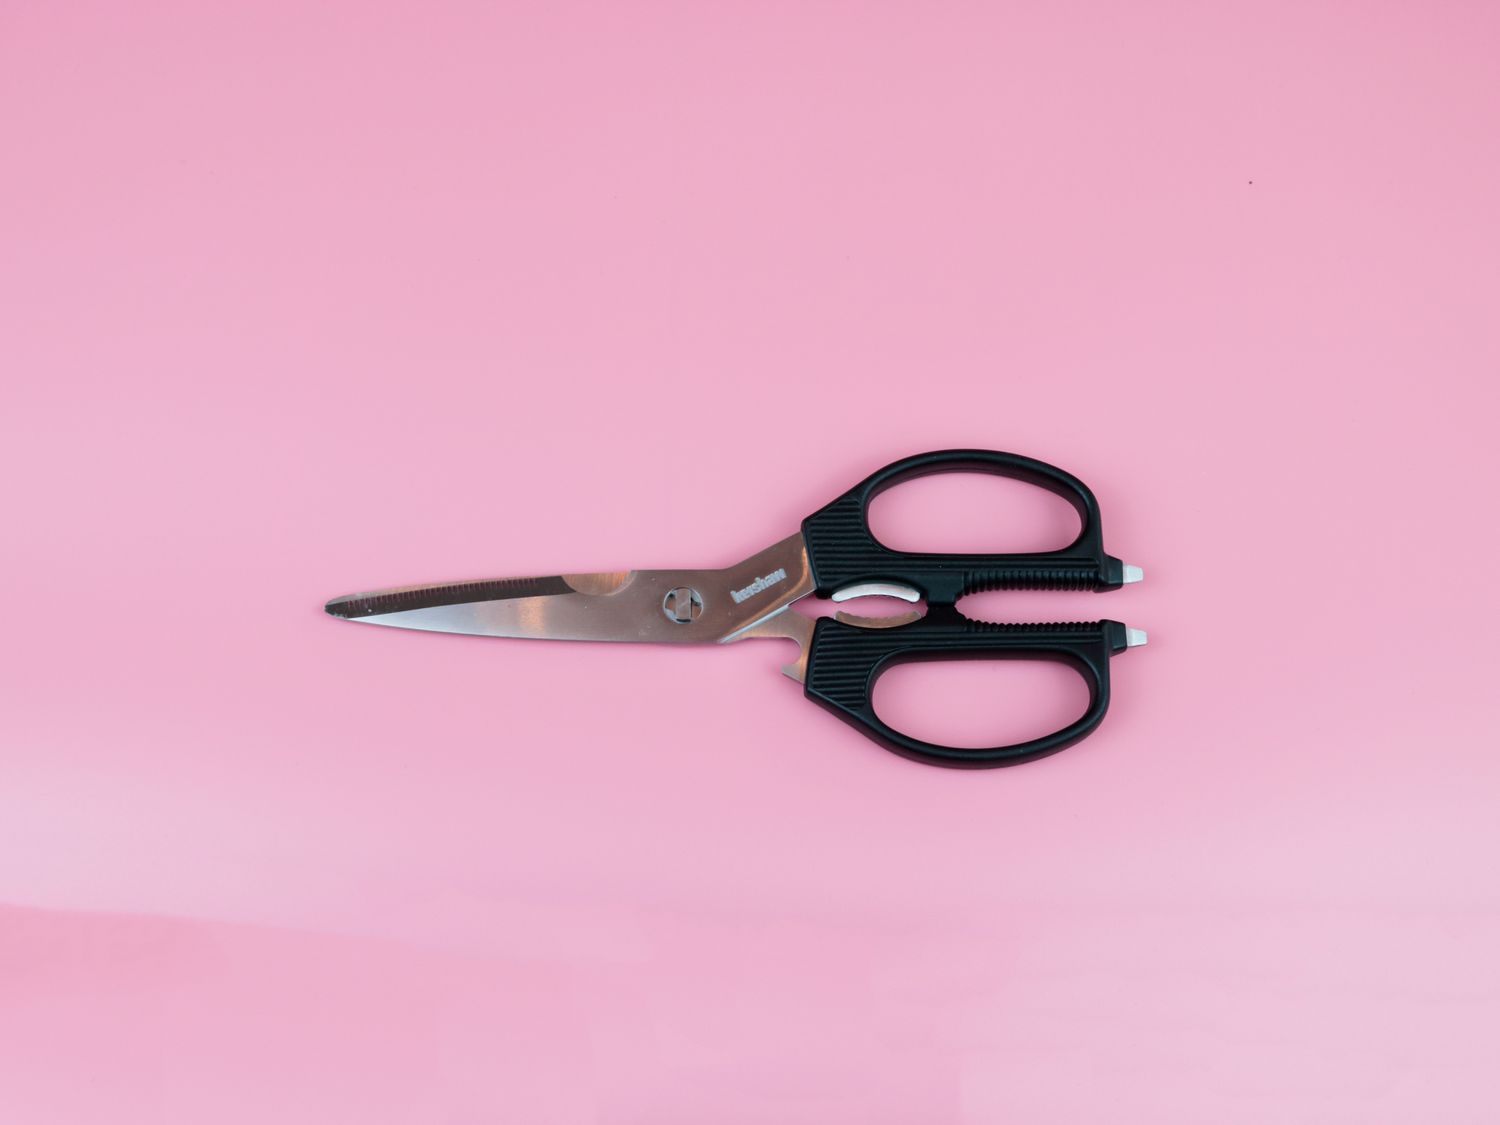 the Kershaw kitchen shears on a pink background